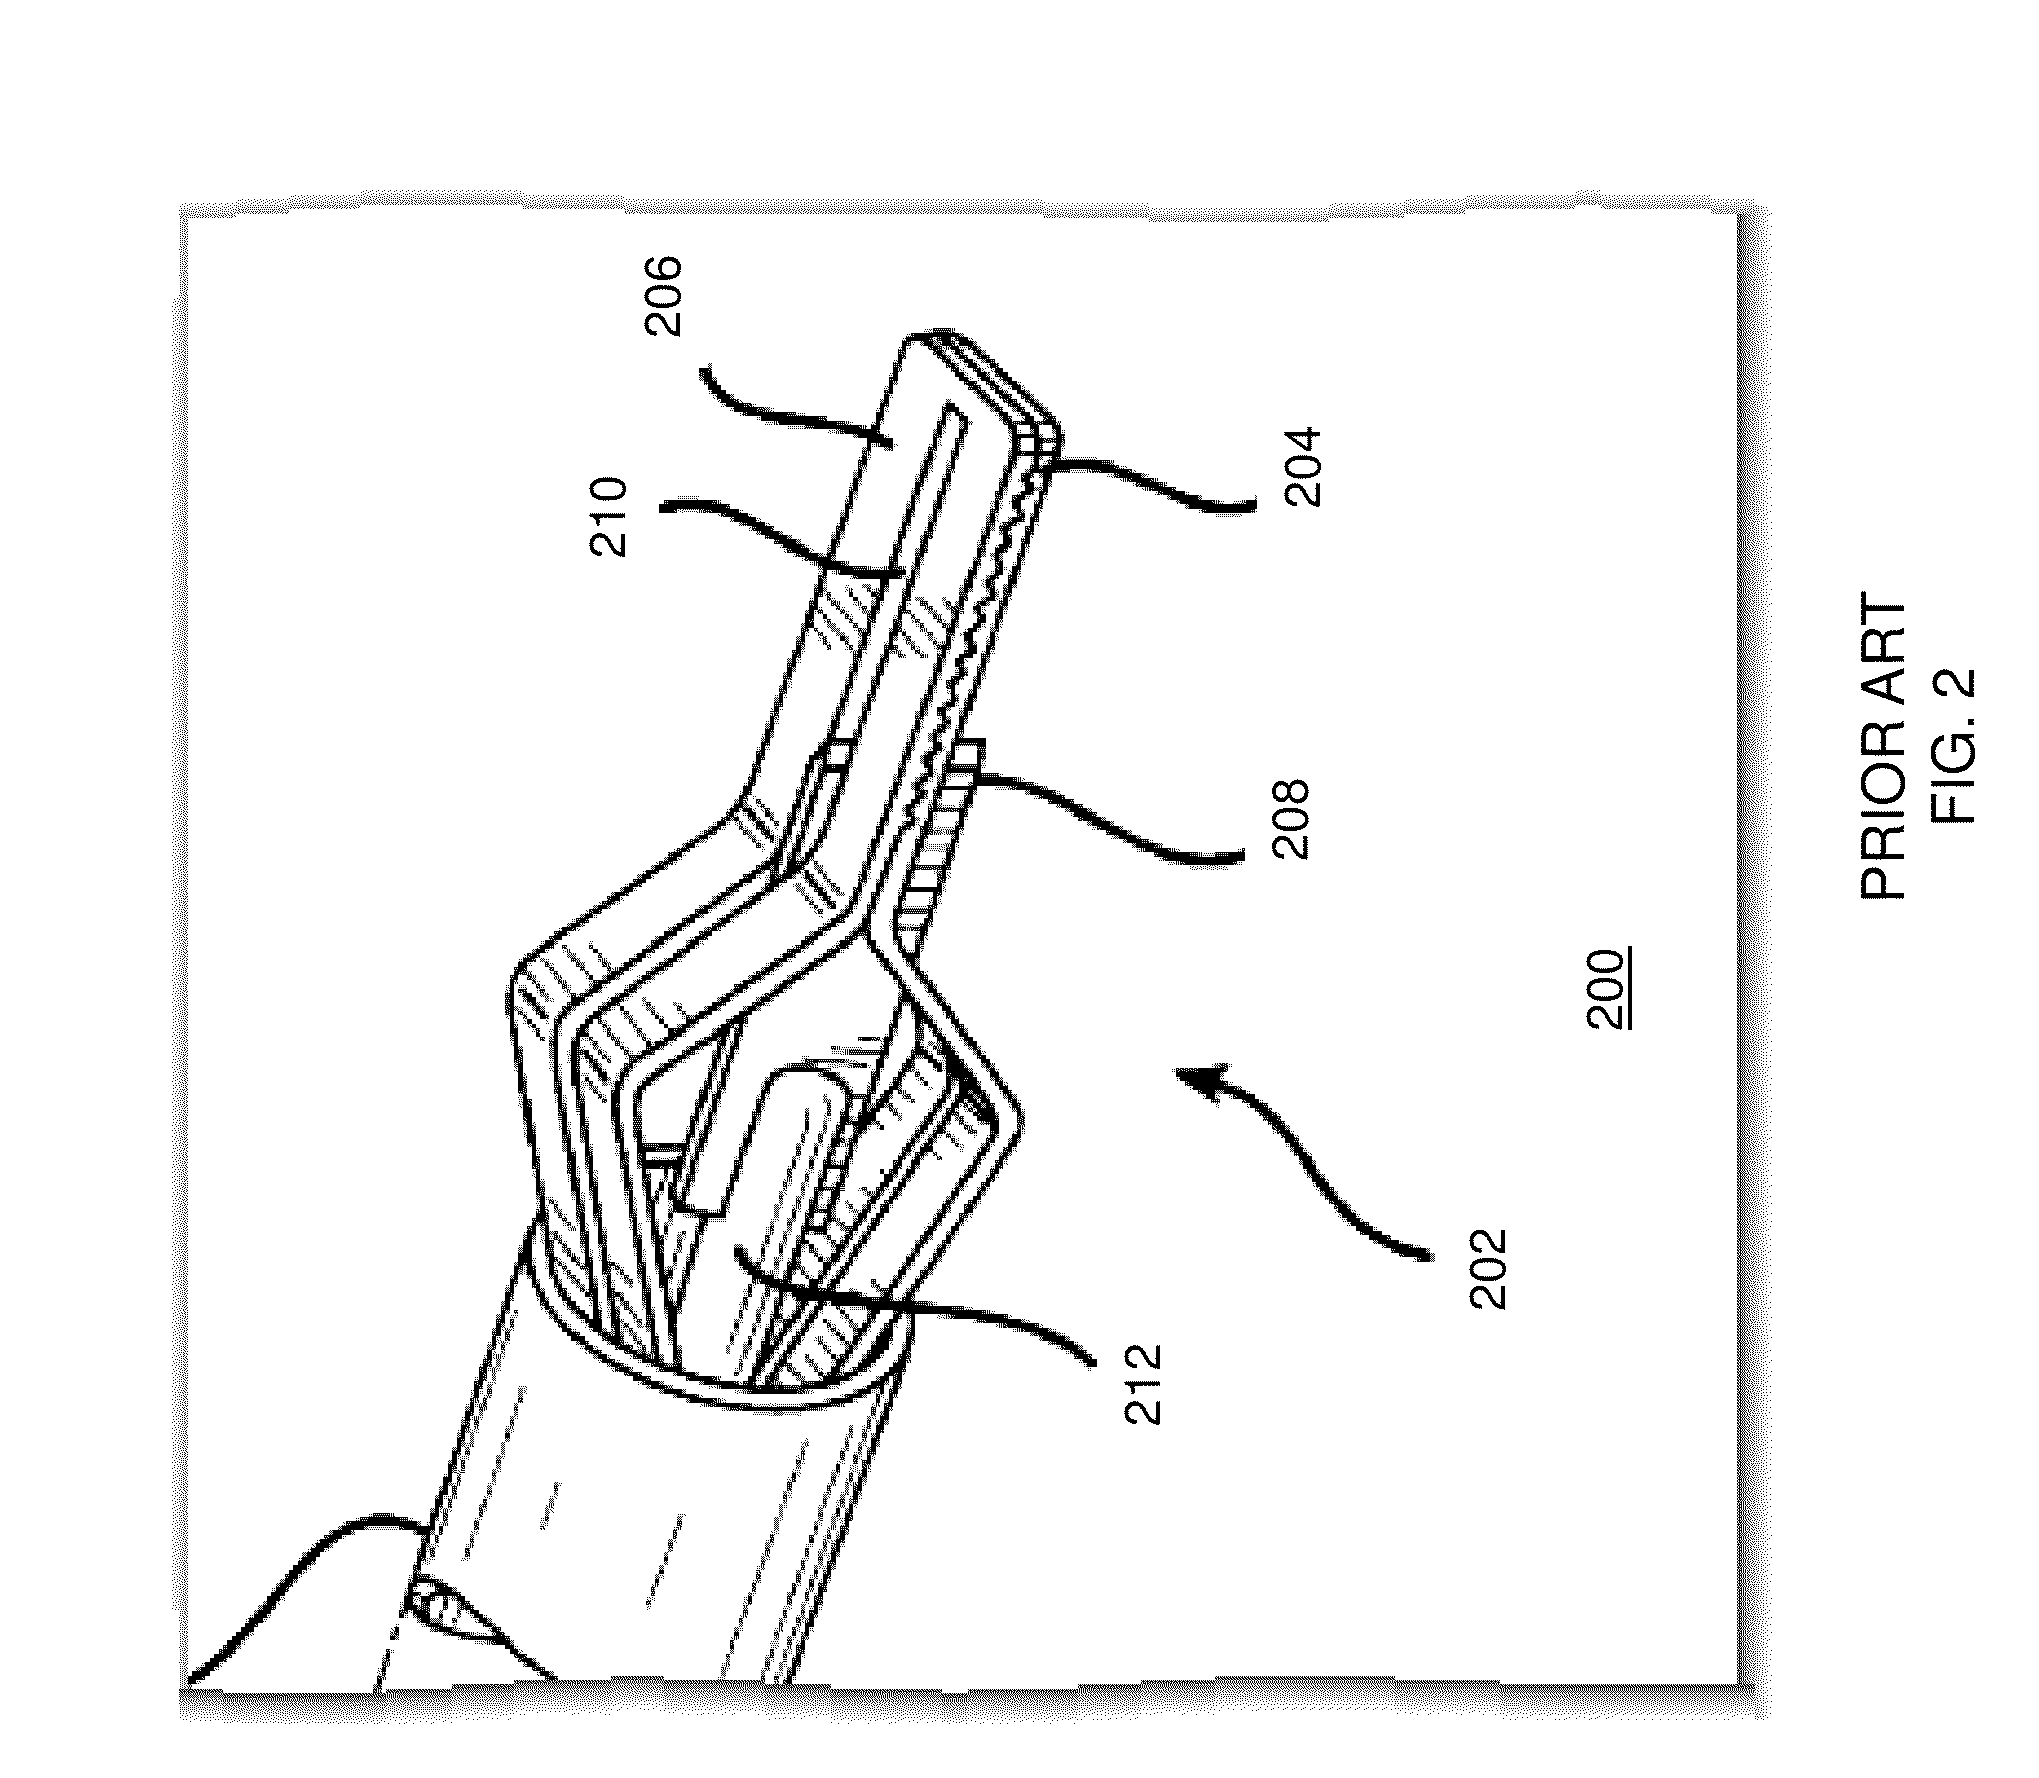 Medical Ultrasonic Cauterization and Cutting Device and Method